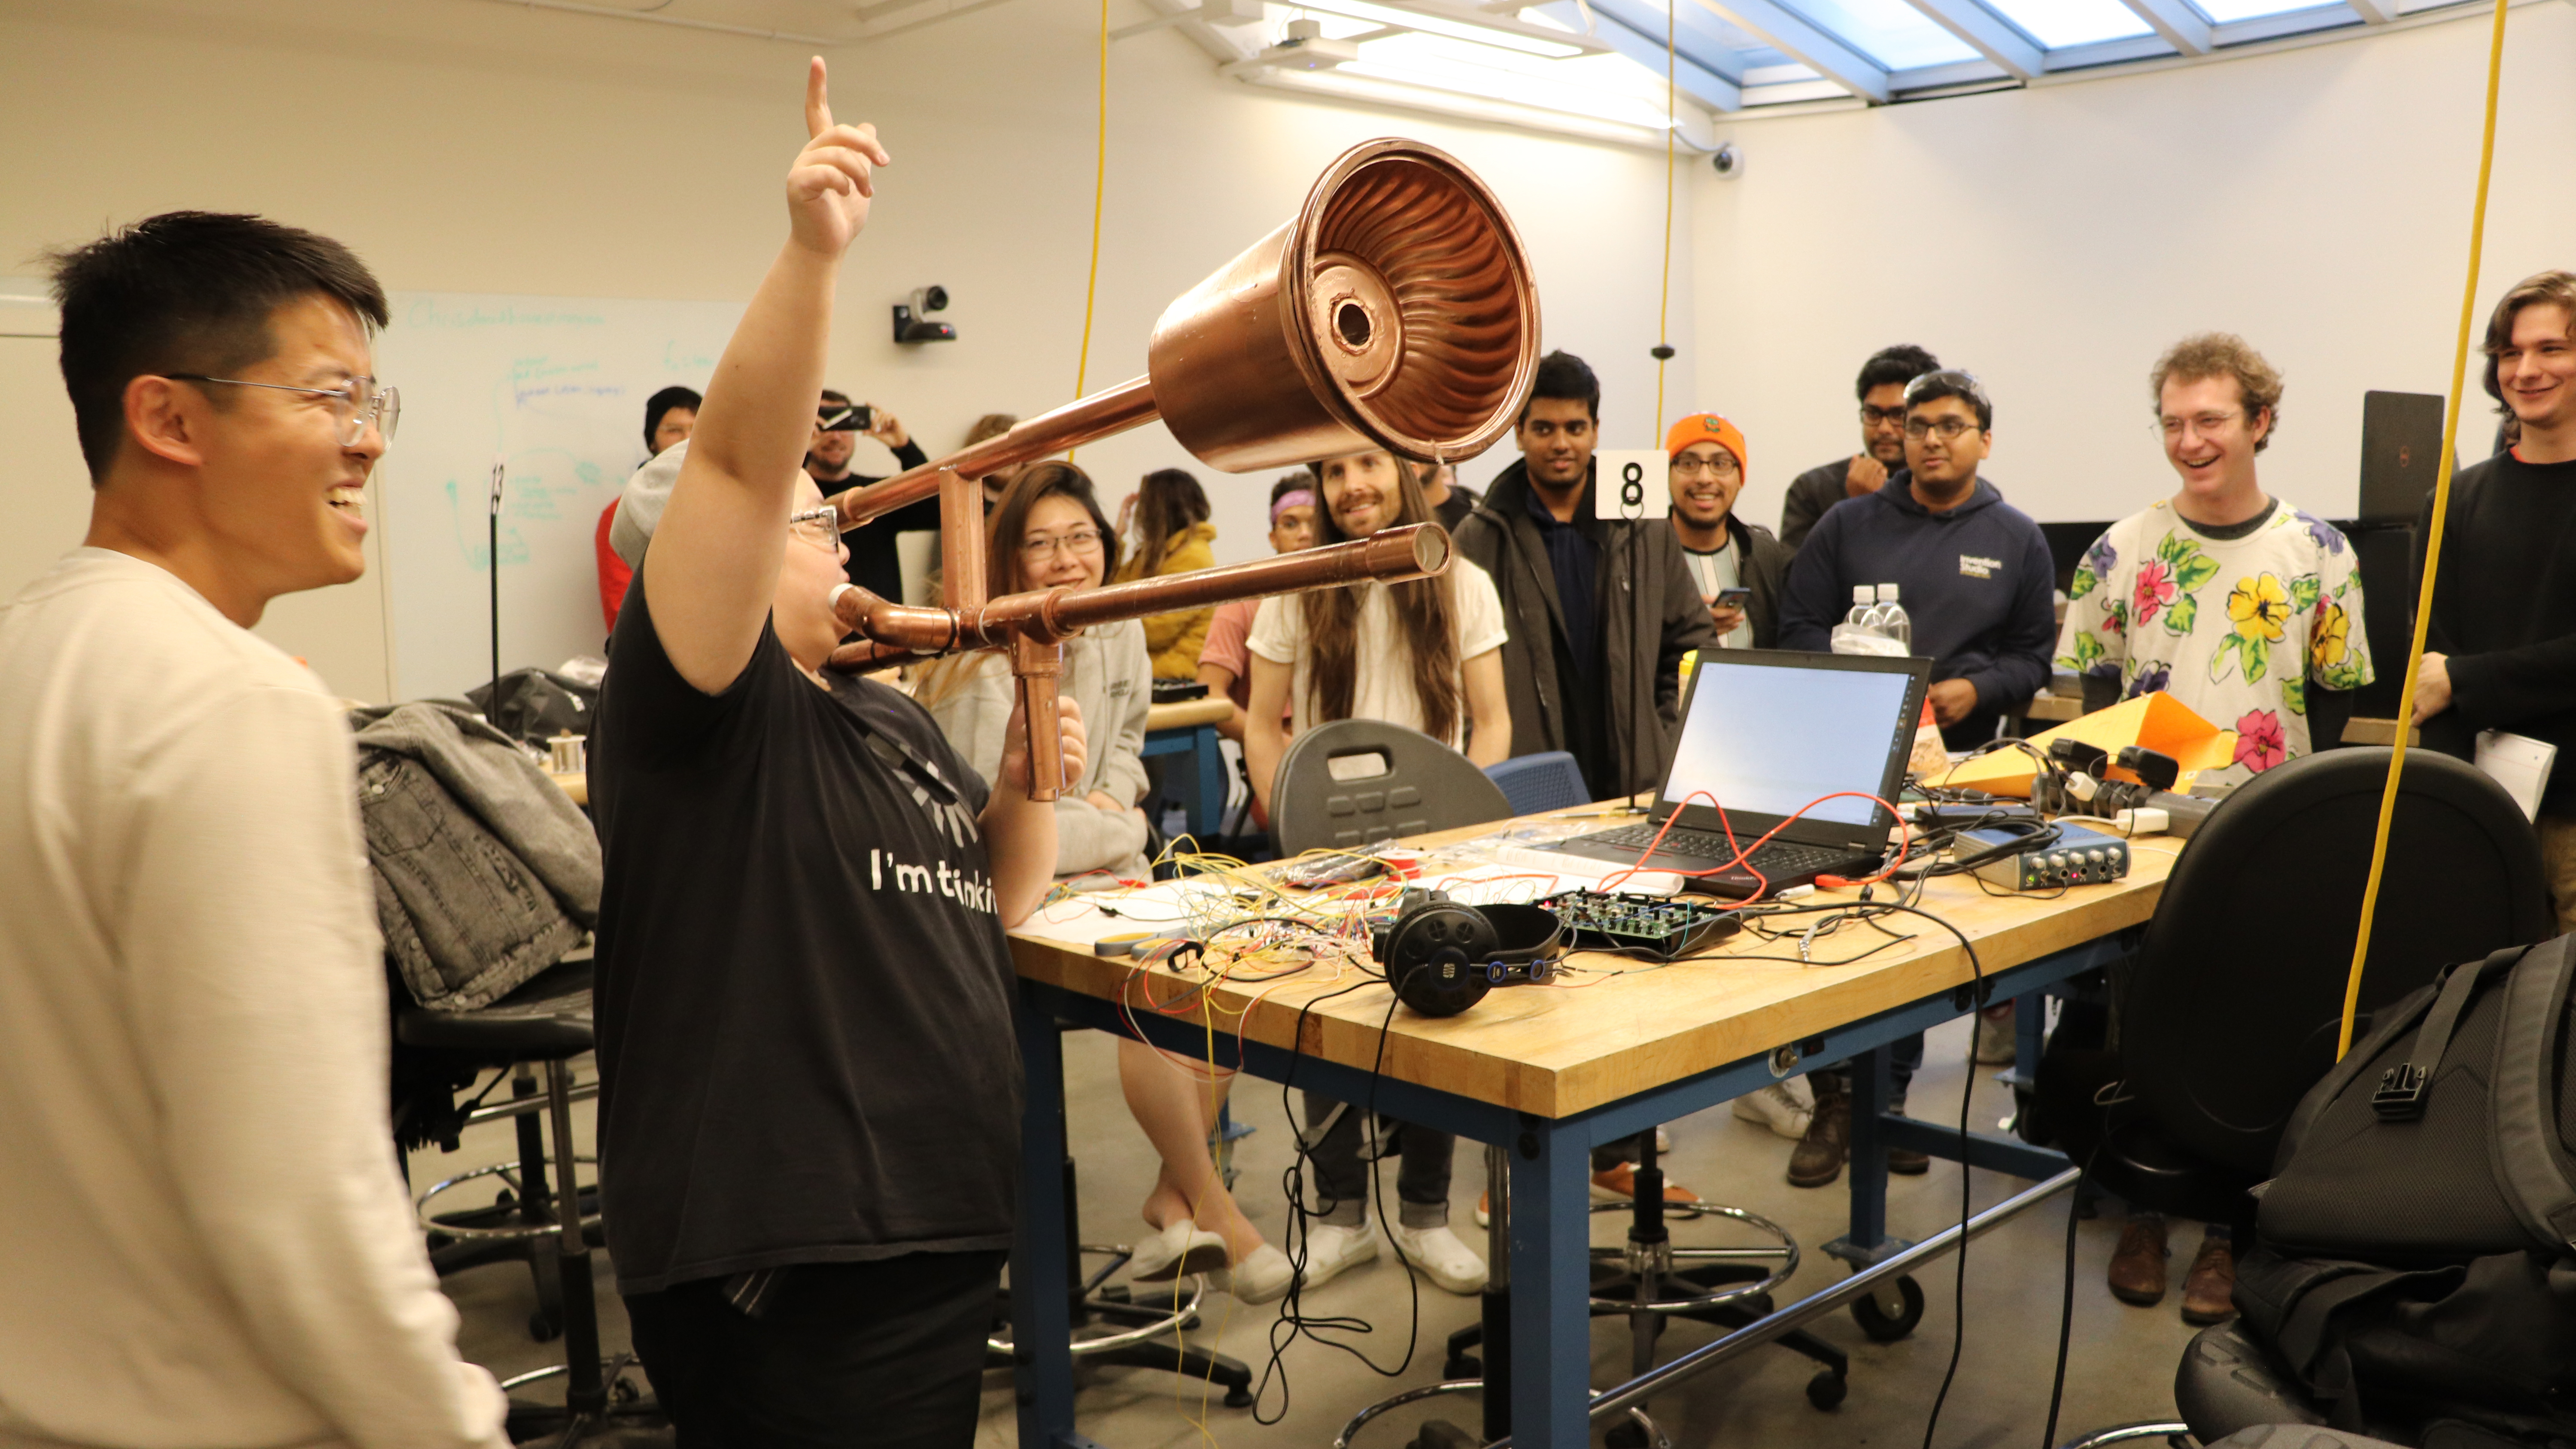 A Hackathon competitor plays a modified trombone while other smiling competitors watch.